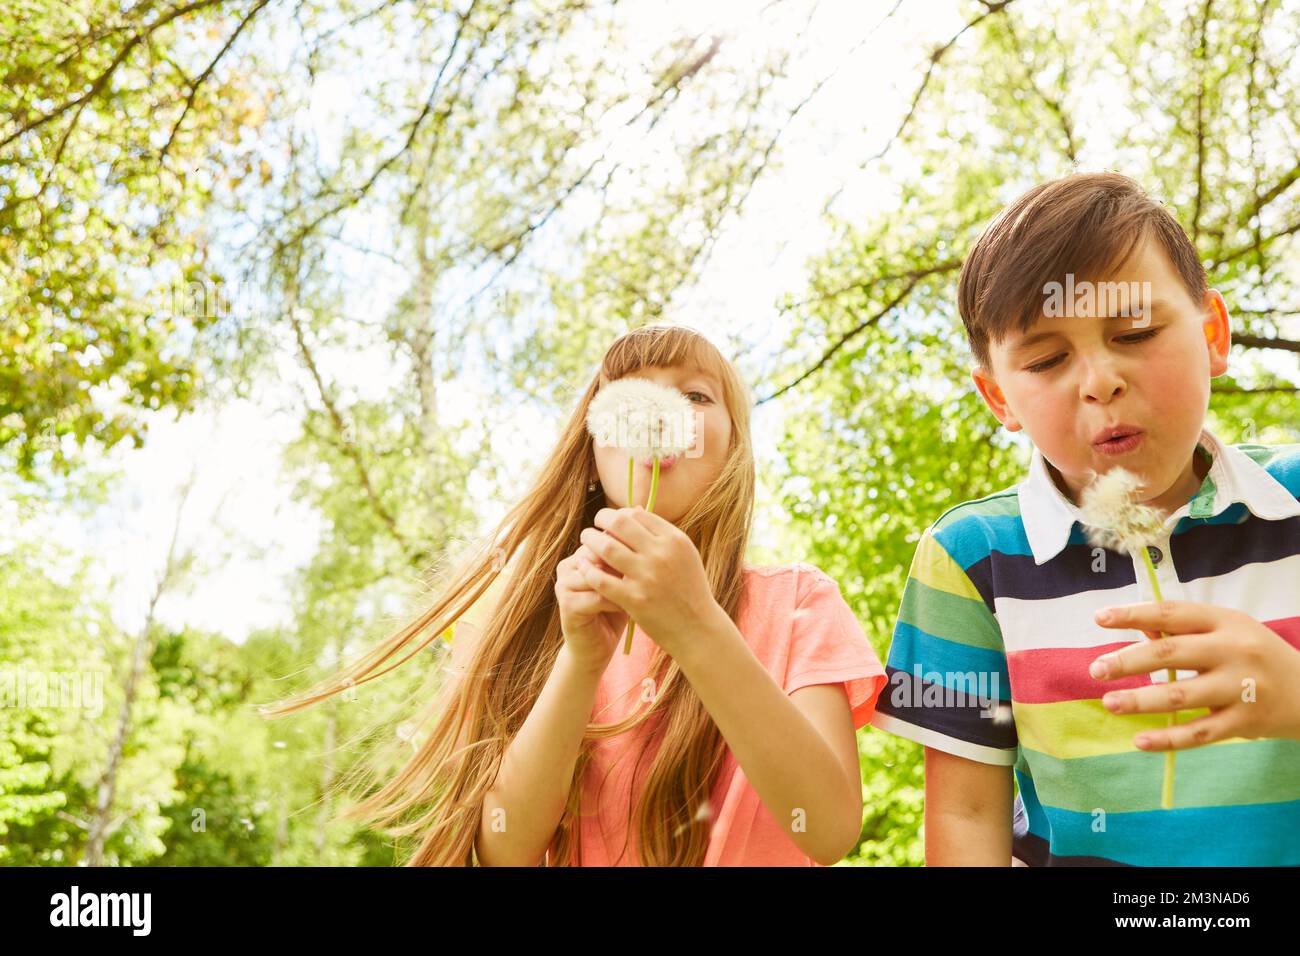 Multiracial male and female friends blowing dandelions while standing in garden Stock Photo